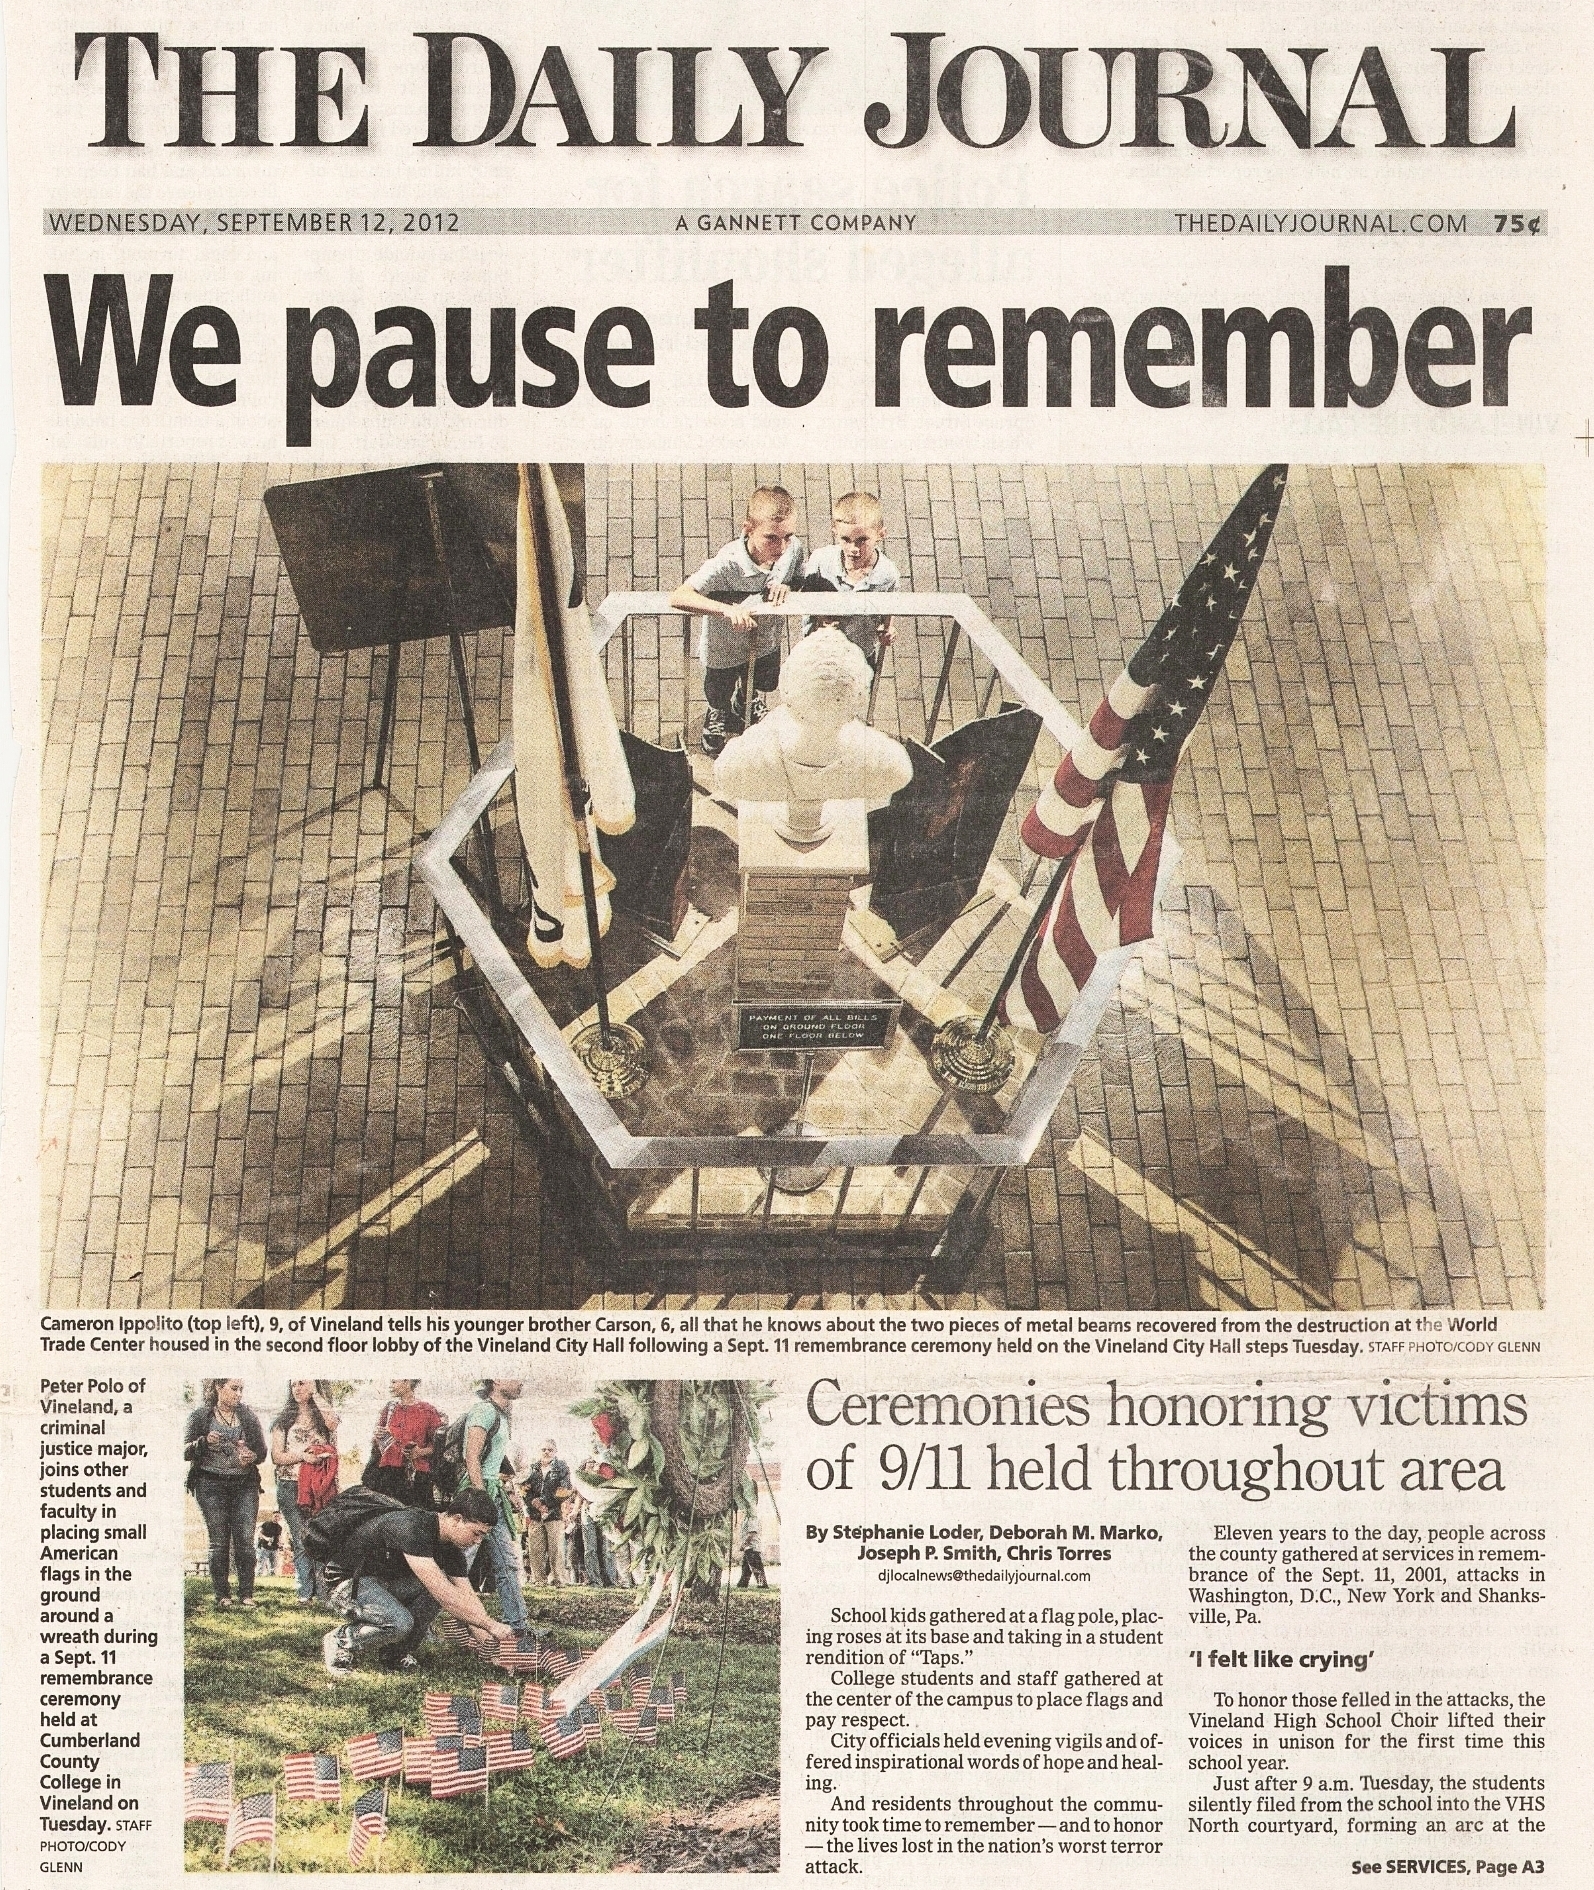  September 11 observations at Vineland City Hall 2012 /  The Daily Journal   